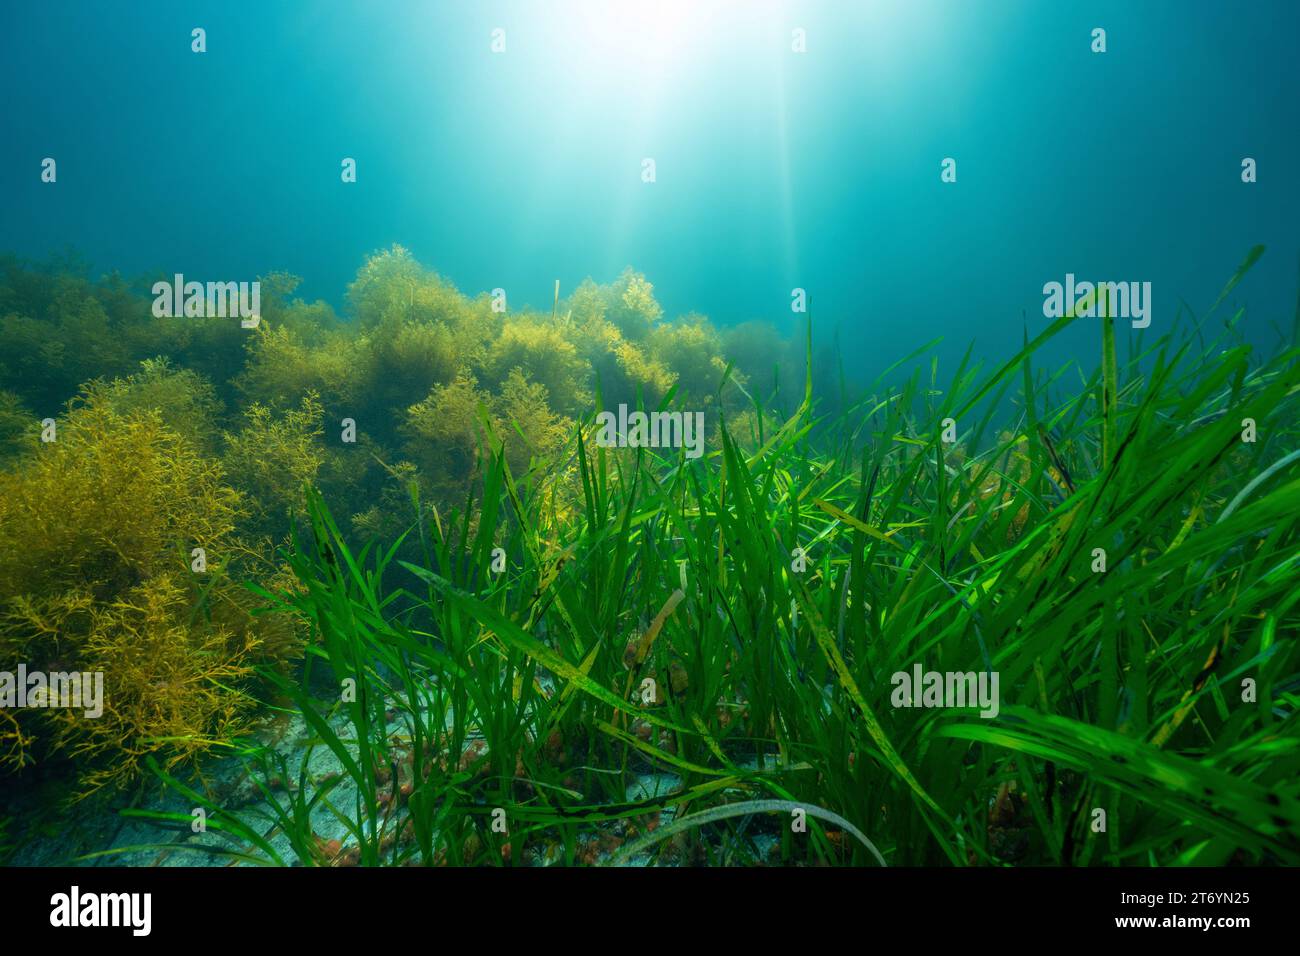 Seagrass and seaweed with sunlight underwater in the Atlantic ocean, natural scene, Eelgrass Zostera marina and Cystoseira baccata algae, Spain Stock Photo